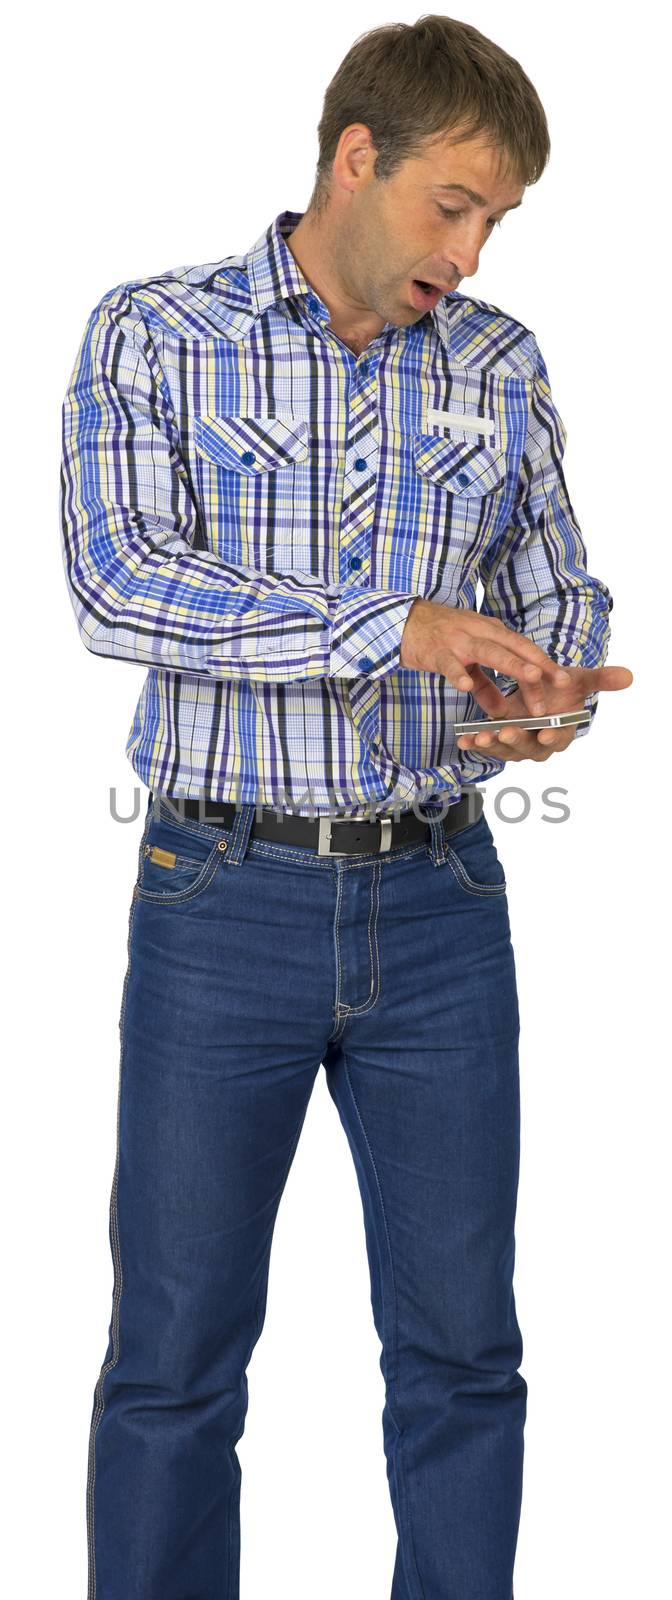 Portrait of man using his smart phone against white background